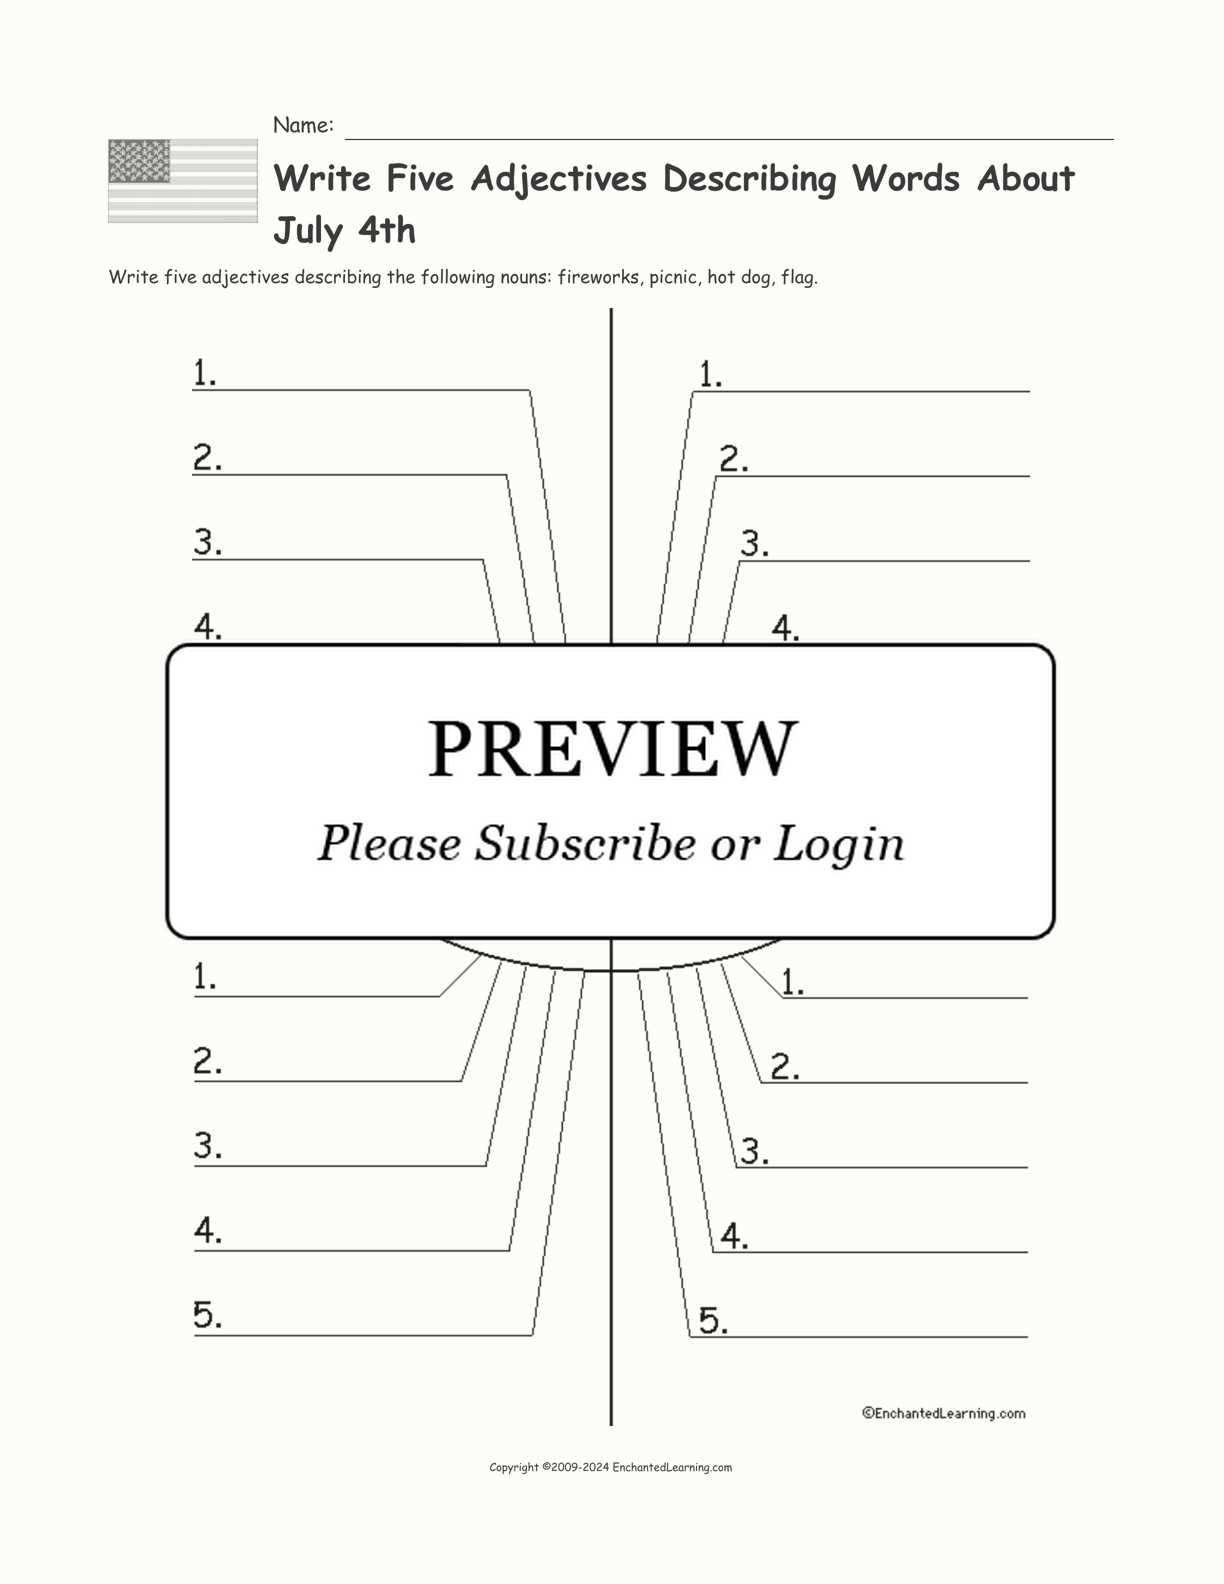 Write Five Adjectives Describing Words About July 4th interactive printout page 1